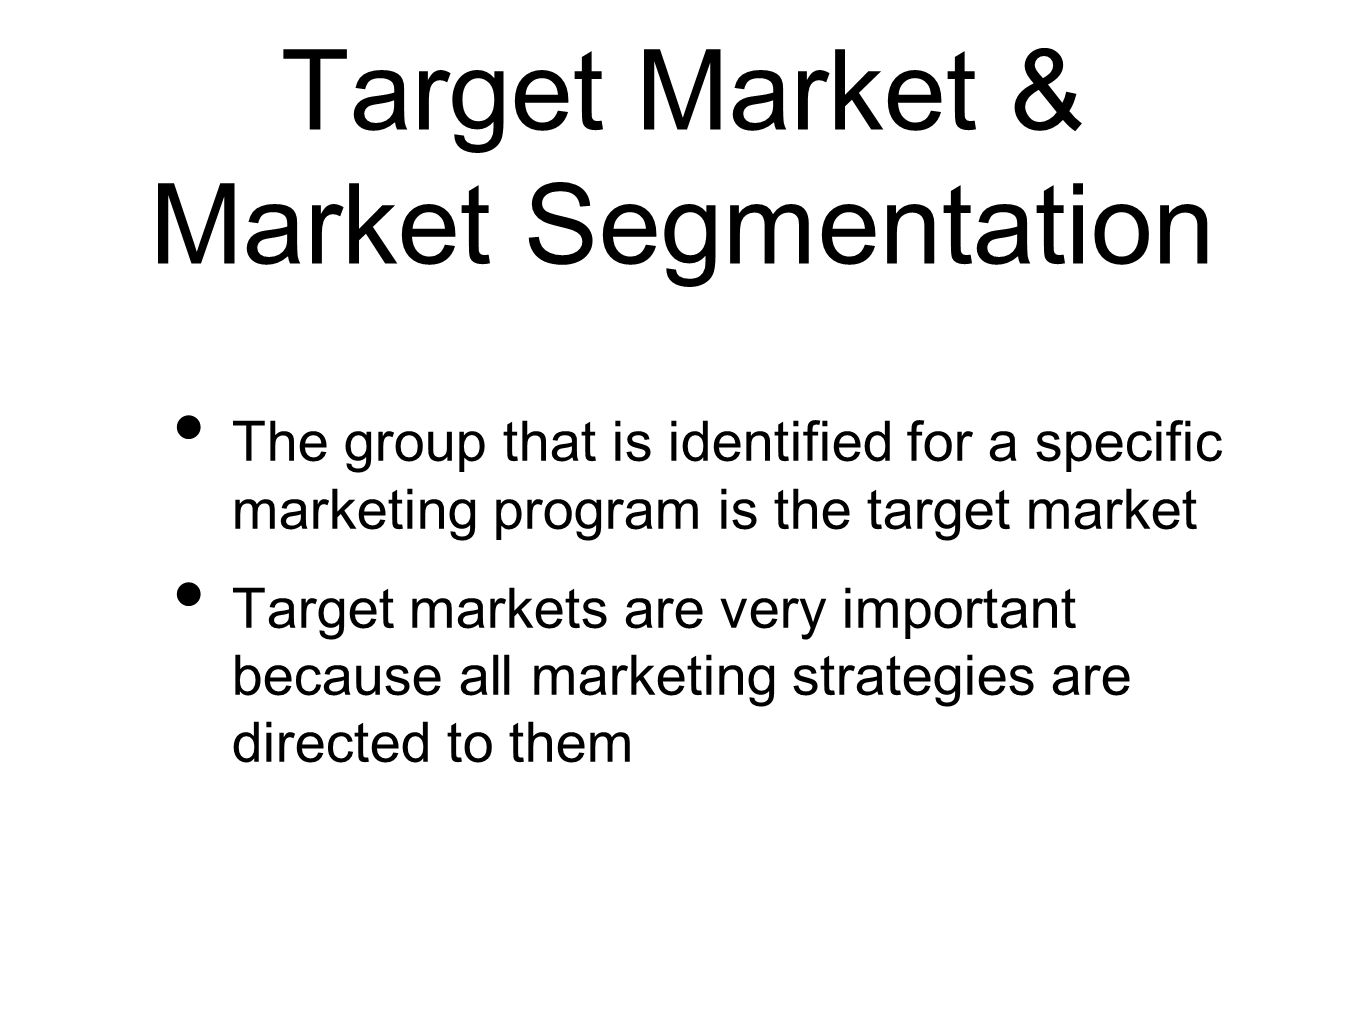 Target Market & Market Segmentation The group that is identified for a specific marketing program is the target market Target markets are very important because all marketing strategies are directed to them